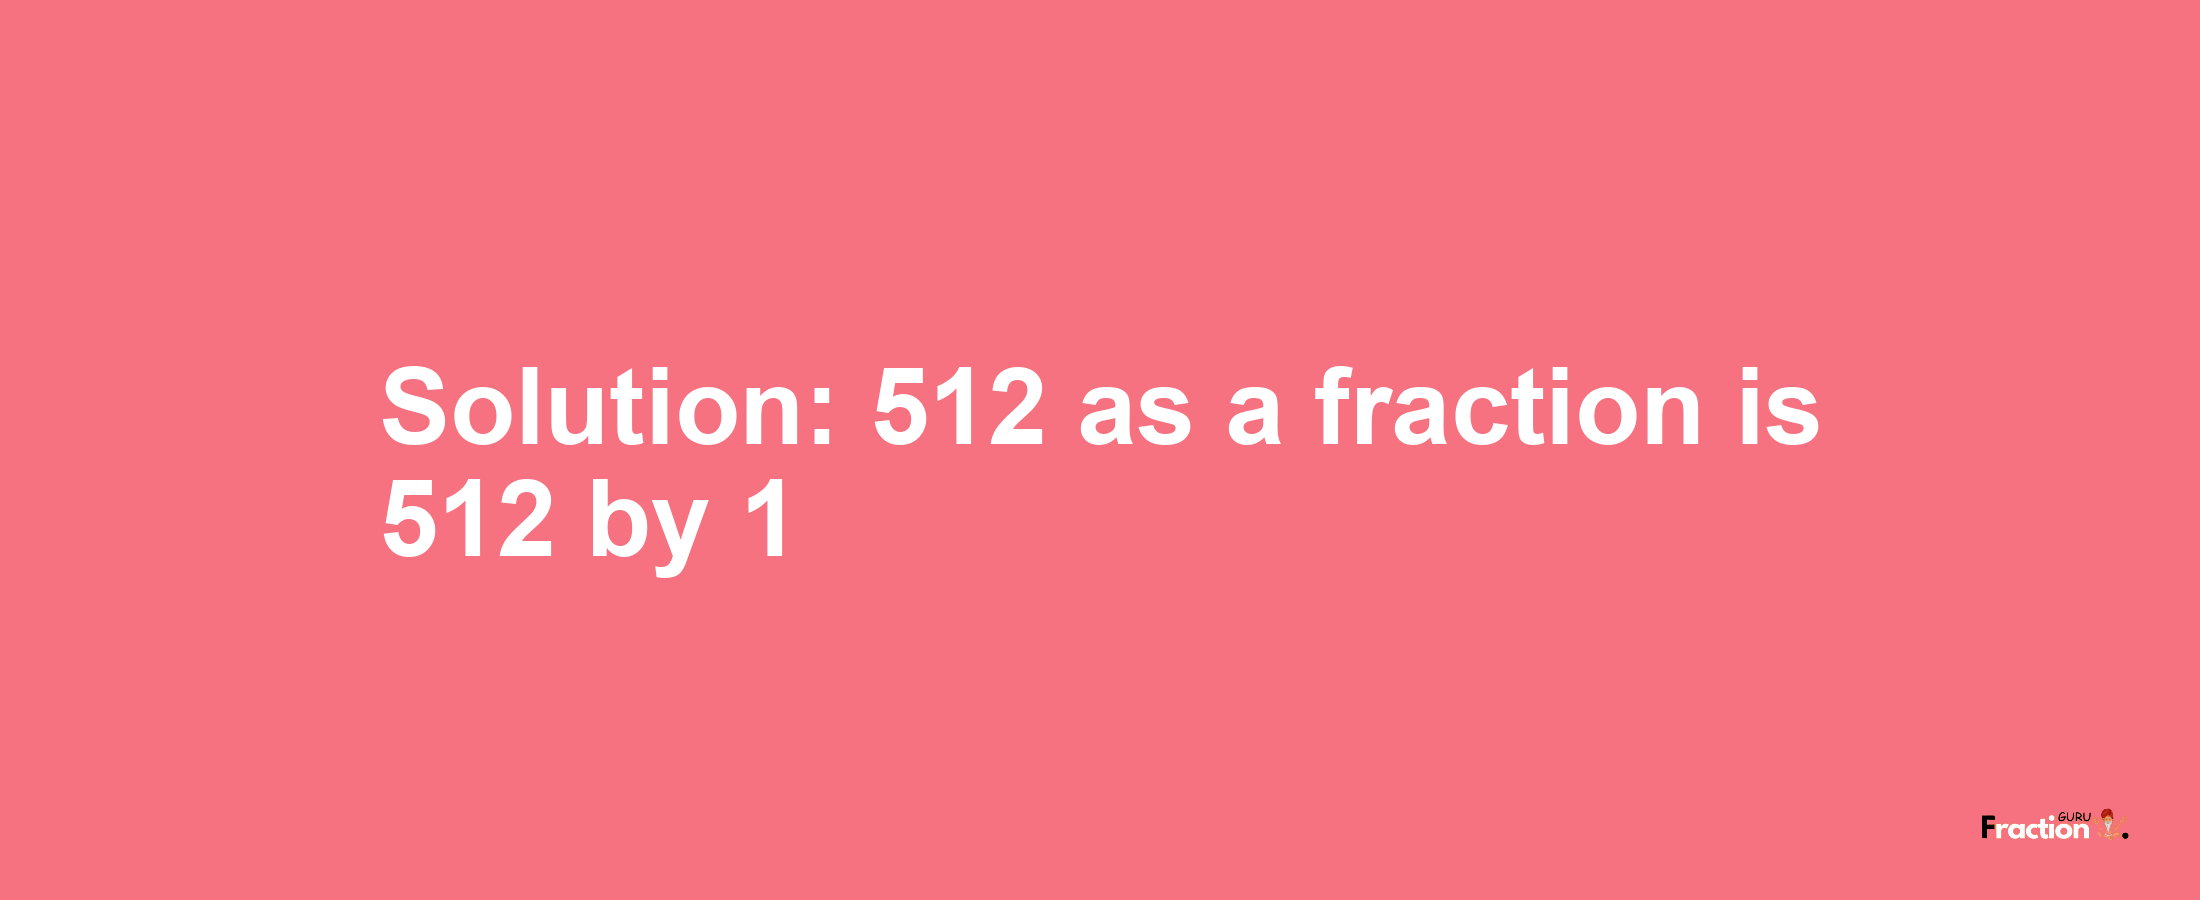 Solution:512 as a fraction is 512/1